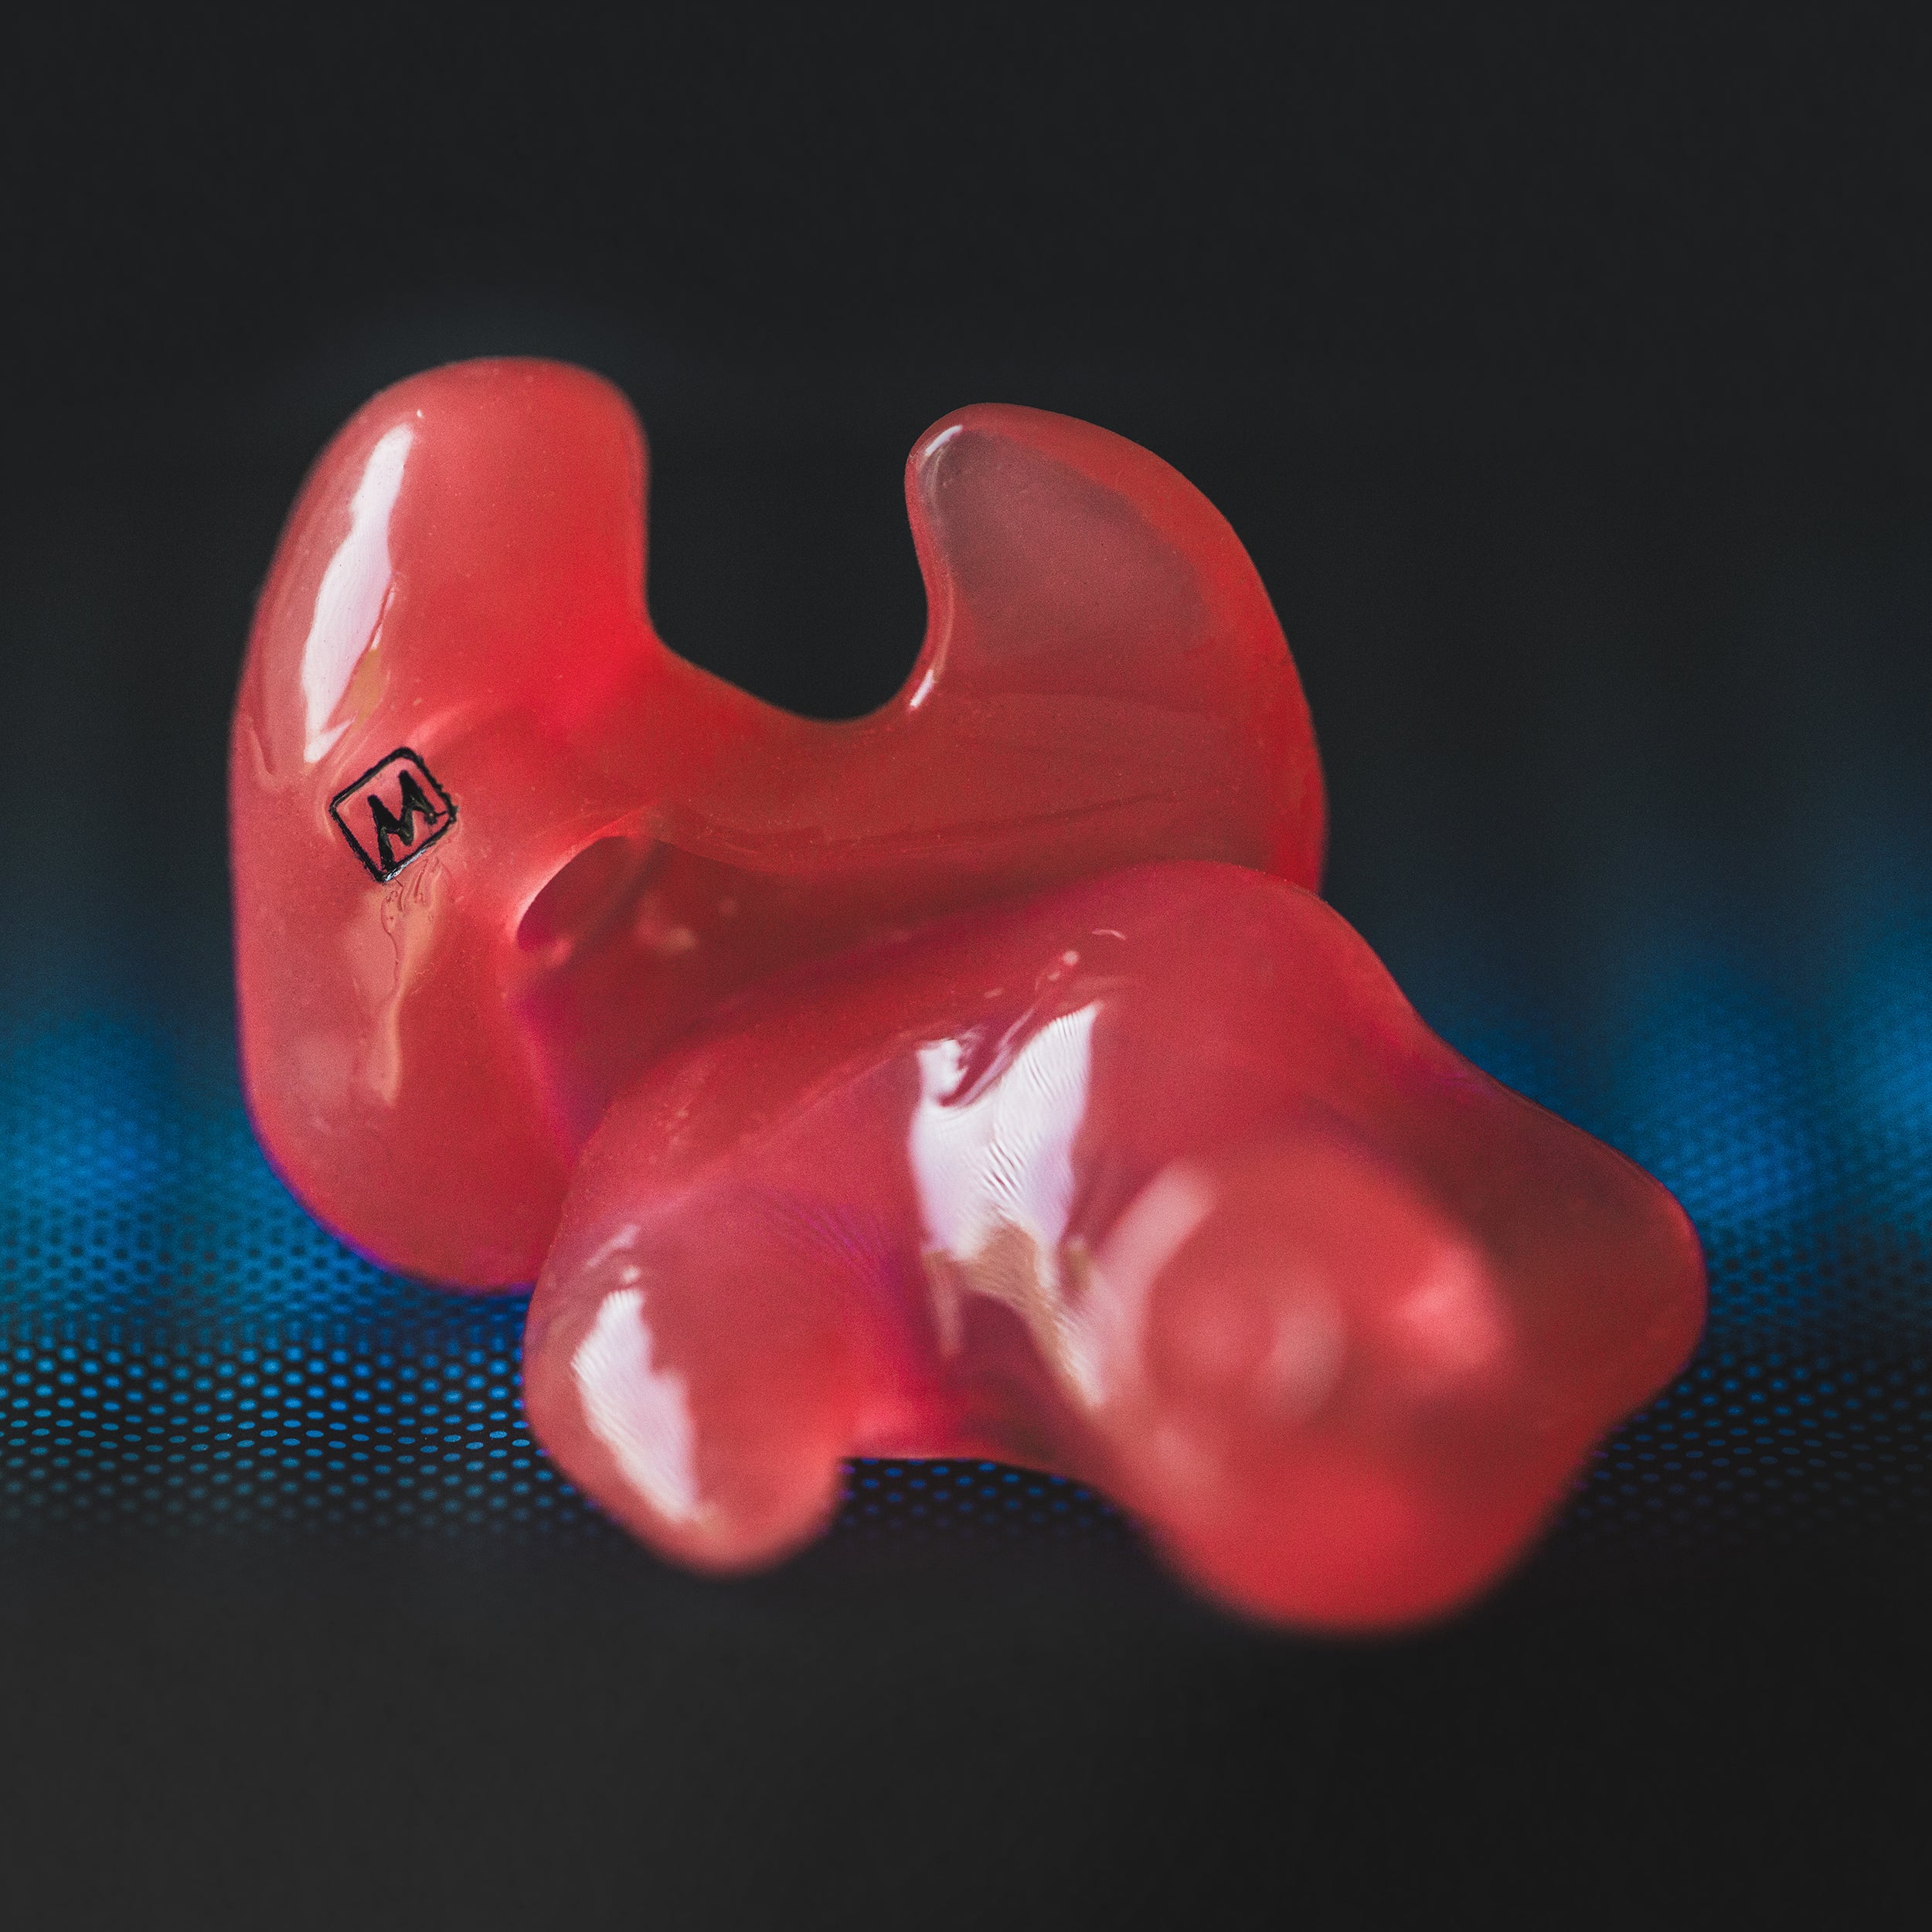 Close-up of a red, custom-made earplug with the letter "m" marked on it, placed on a dark blue textured surface.